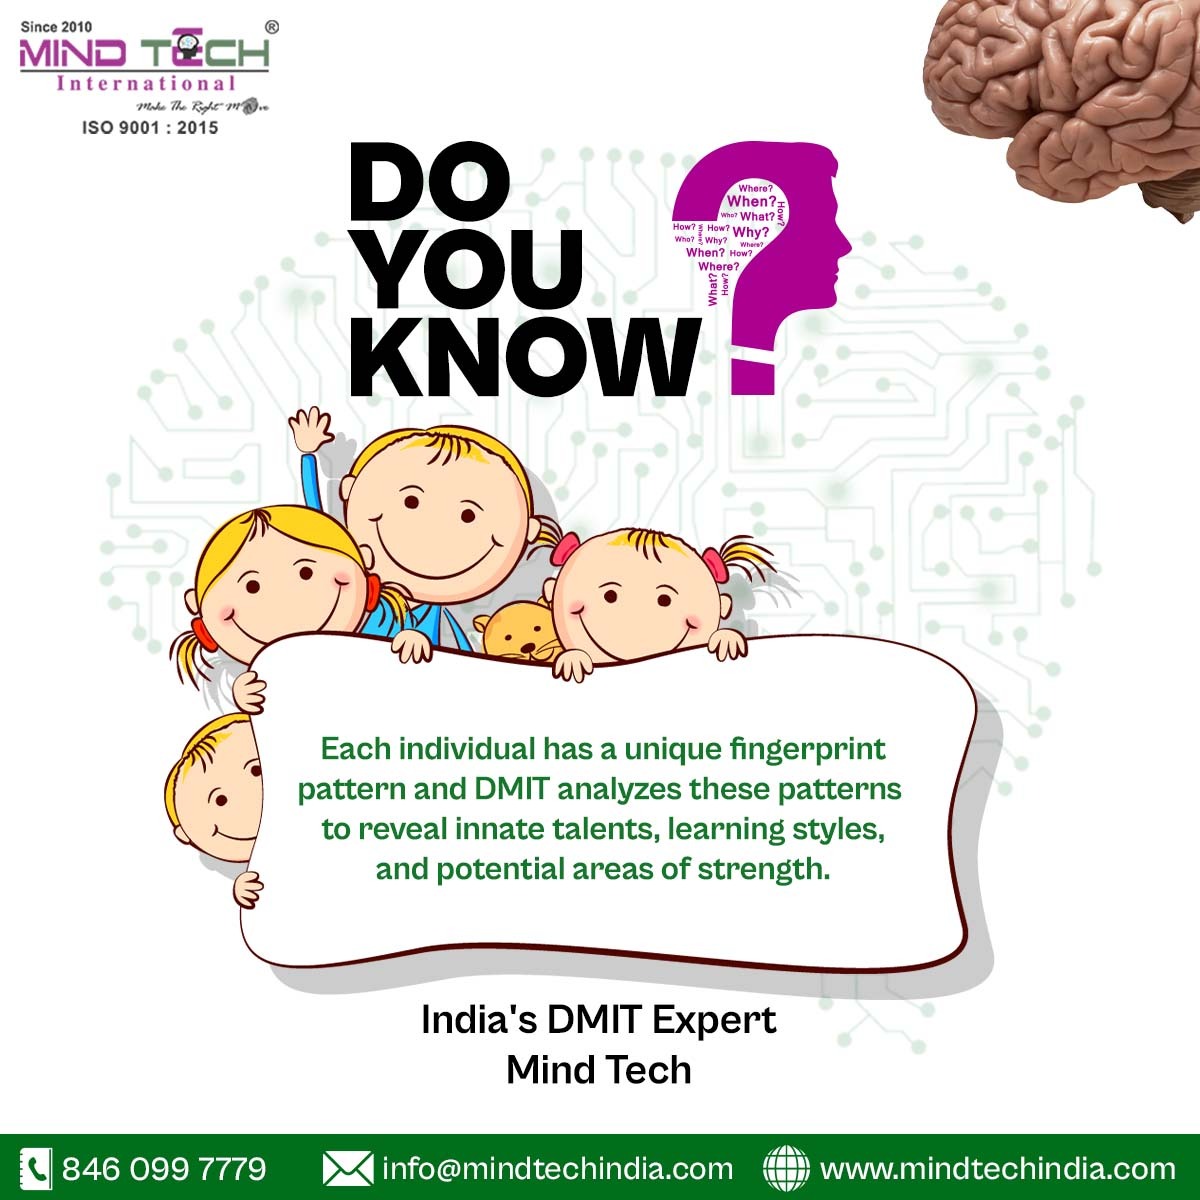 DO YOU KNOW❓

👇 👇
Each individual has a unique fingerprint pattern and DMIT analyzes these patterns to reveal innate talents, learning styles, and potential areas of strength.
#counselling #careercounselling #CareerConsulting #career #education #students